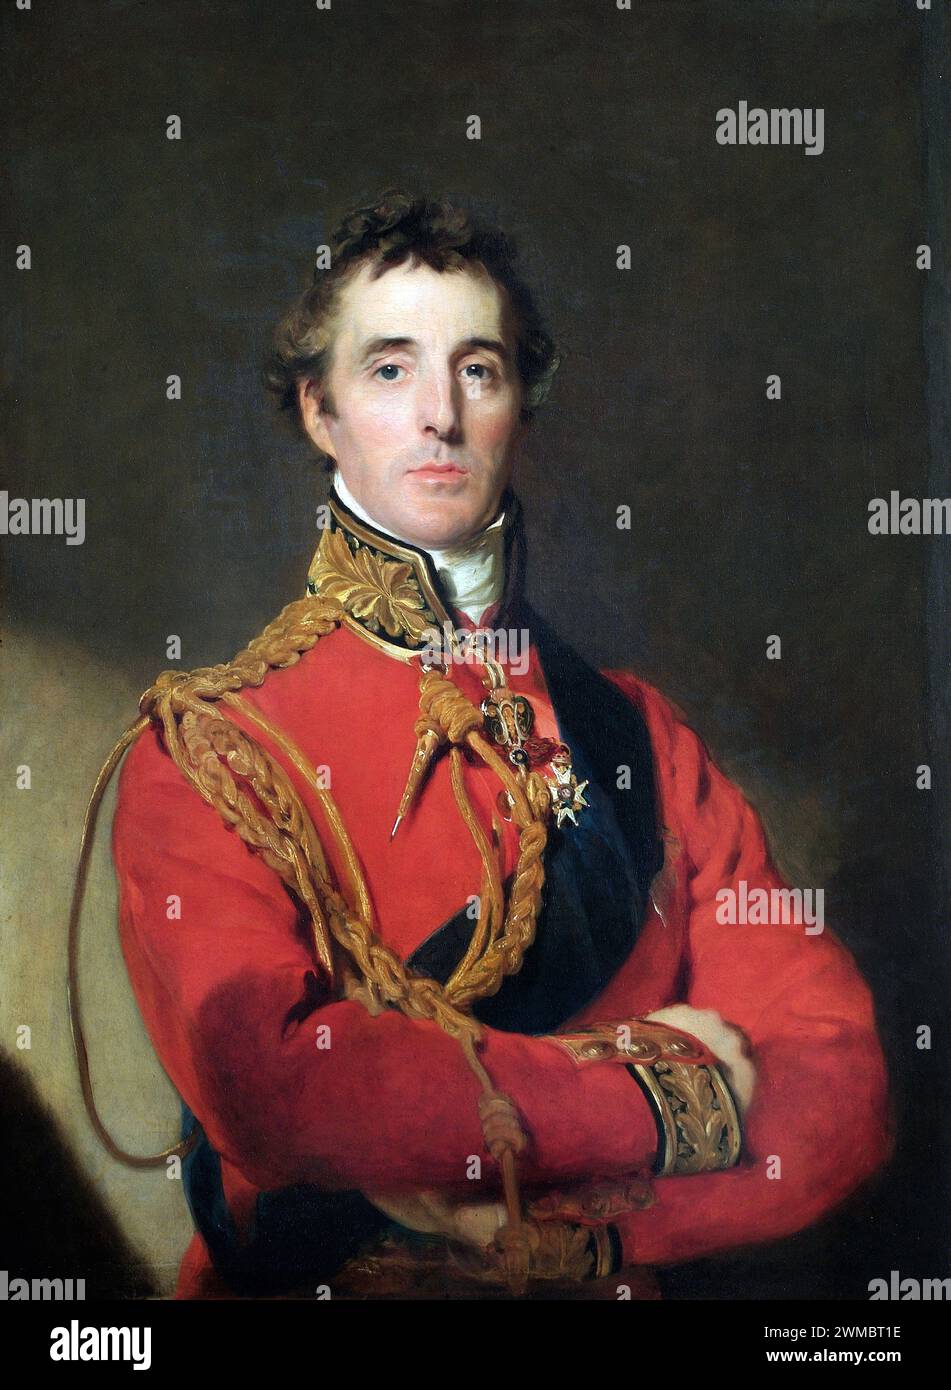 Arthur Wellesley, 1st Duke of Wellington, commander of the Anglo-allied army, Field Marshal Arthur Wellesley, 1st Duke of Wellington, Arthur Wellesley, 1st Duke of Wellington, Field Marshal Arthur Wellesley, 1st Duke of Wellington, (1769 – 1852) British statesman, soldier, and Tory politician, leading military and political figure of 19th-century Britain, Painting by Thomas Lawrence Stock Photo